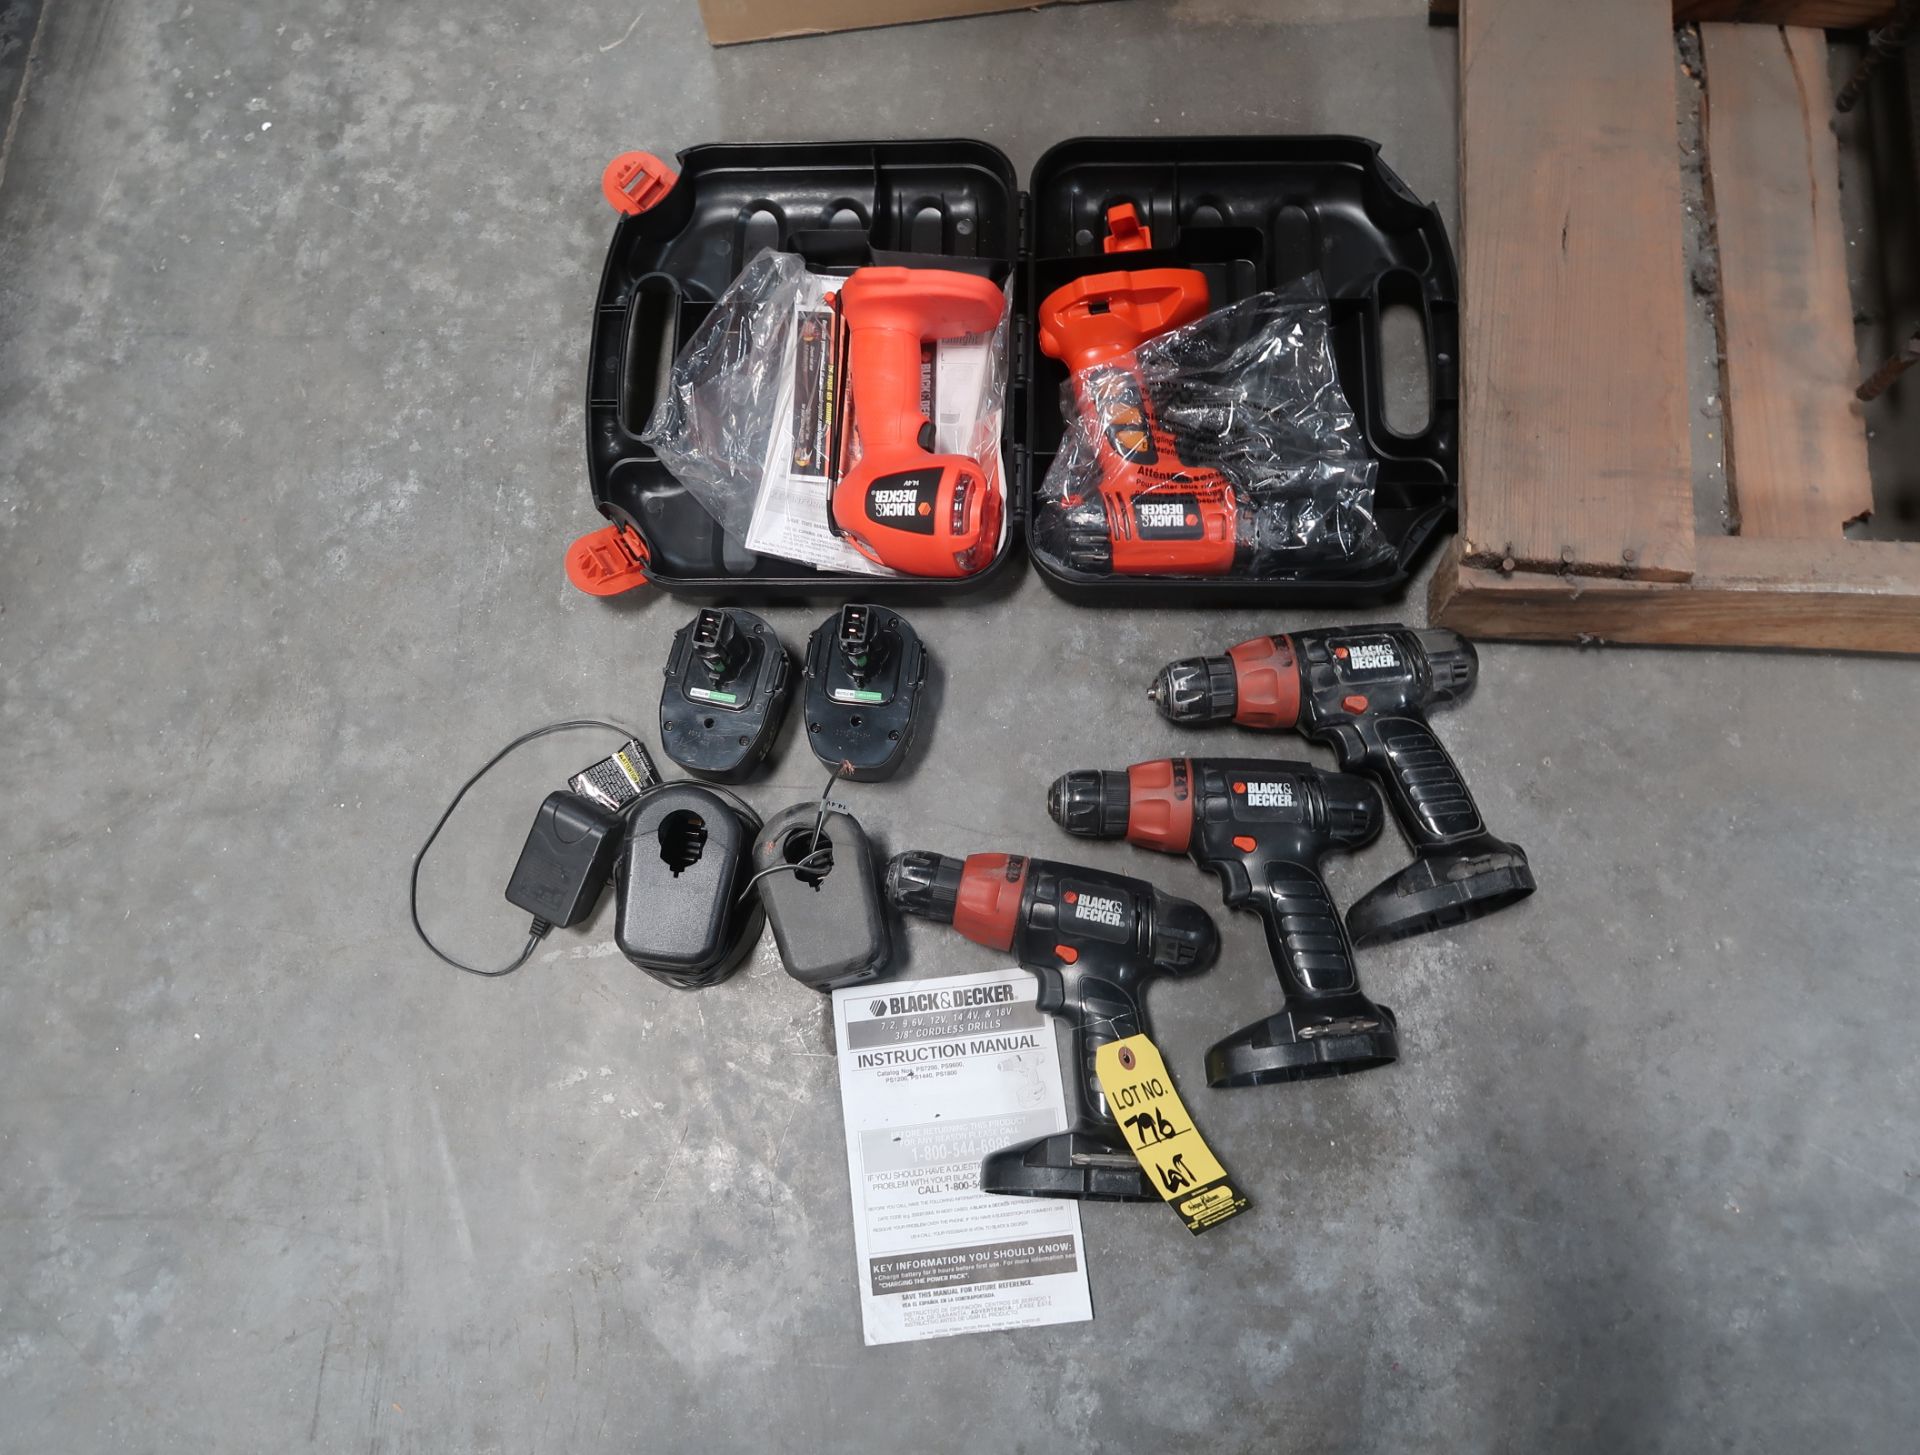 3 BLACK & DECKER DRILLS W/ BATTERIES & CHARGERS - Image 3 of 3